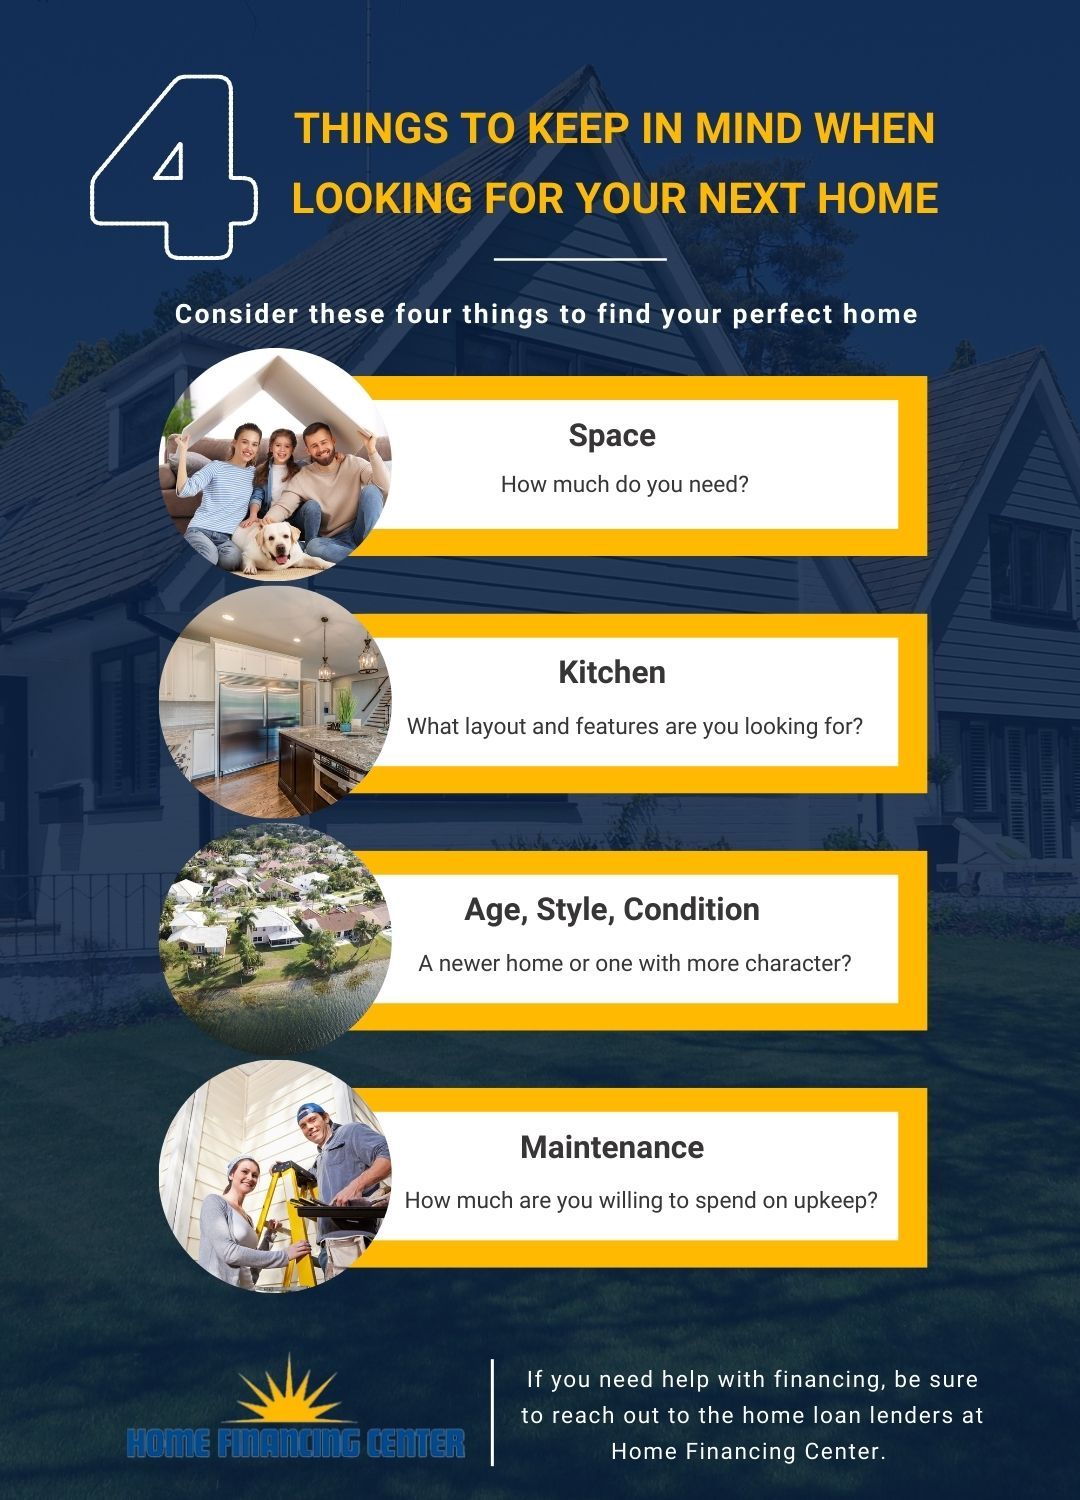 M25944 - IG - 4 Things You Should Think about When Buying Your Next Home.jpg